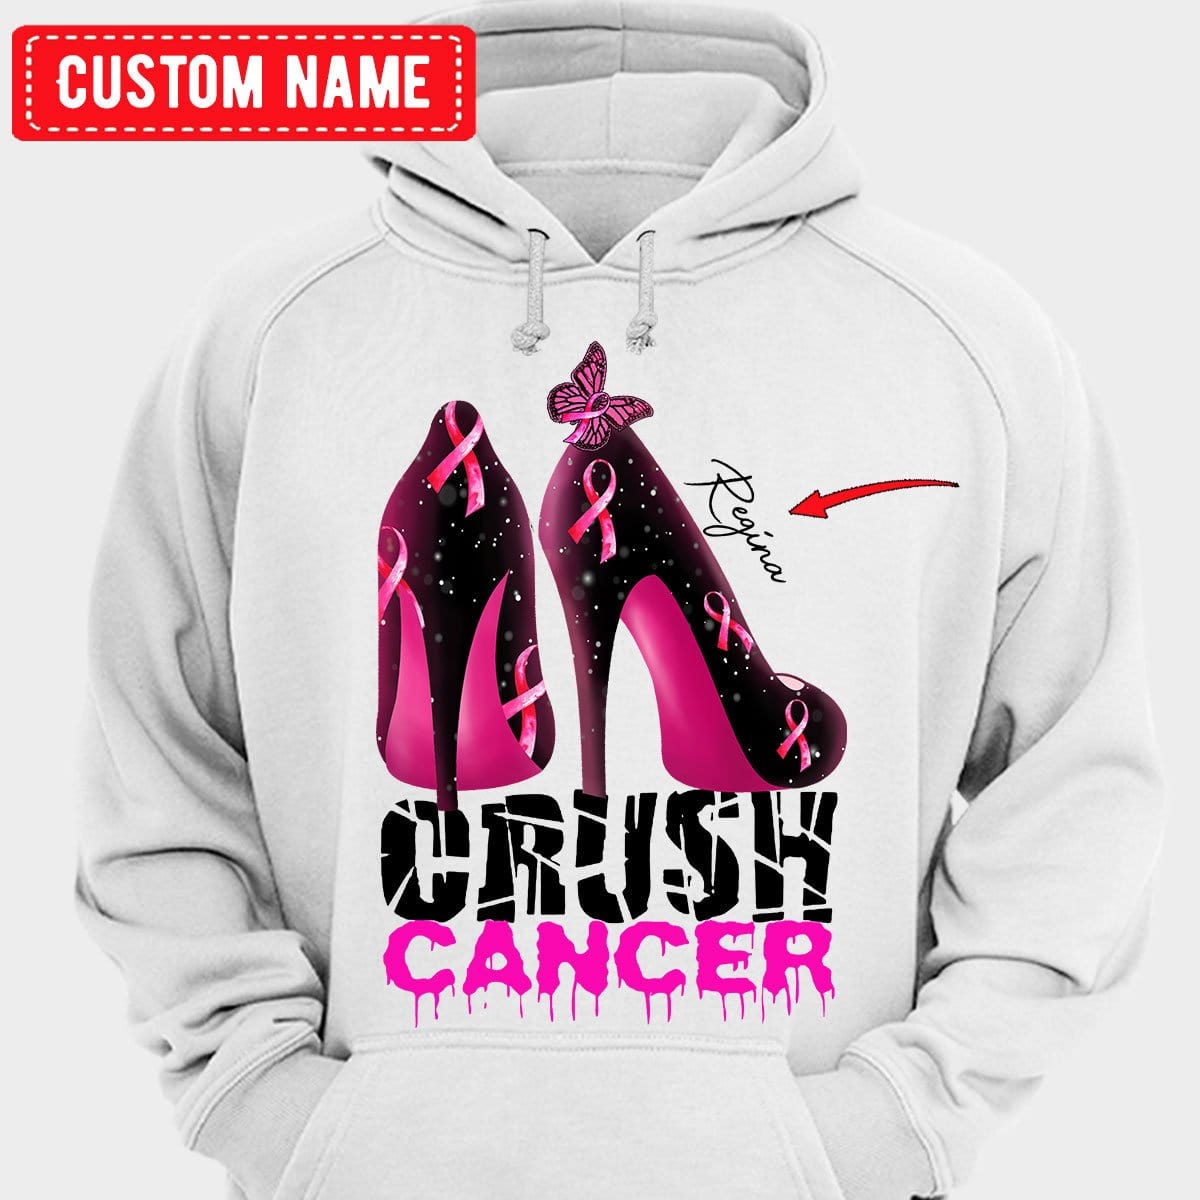 Crush Cancer With High Heels Personalized Breast Cancer Shirts